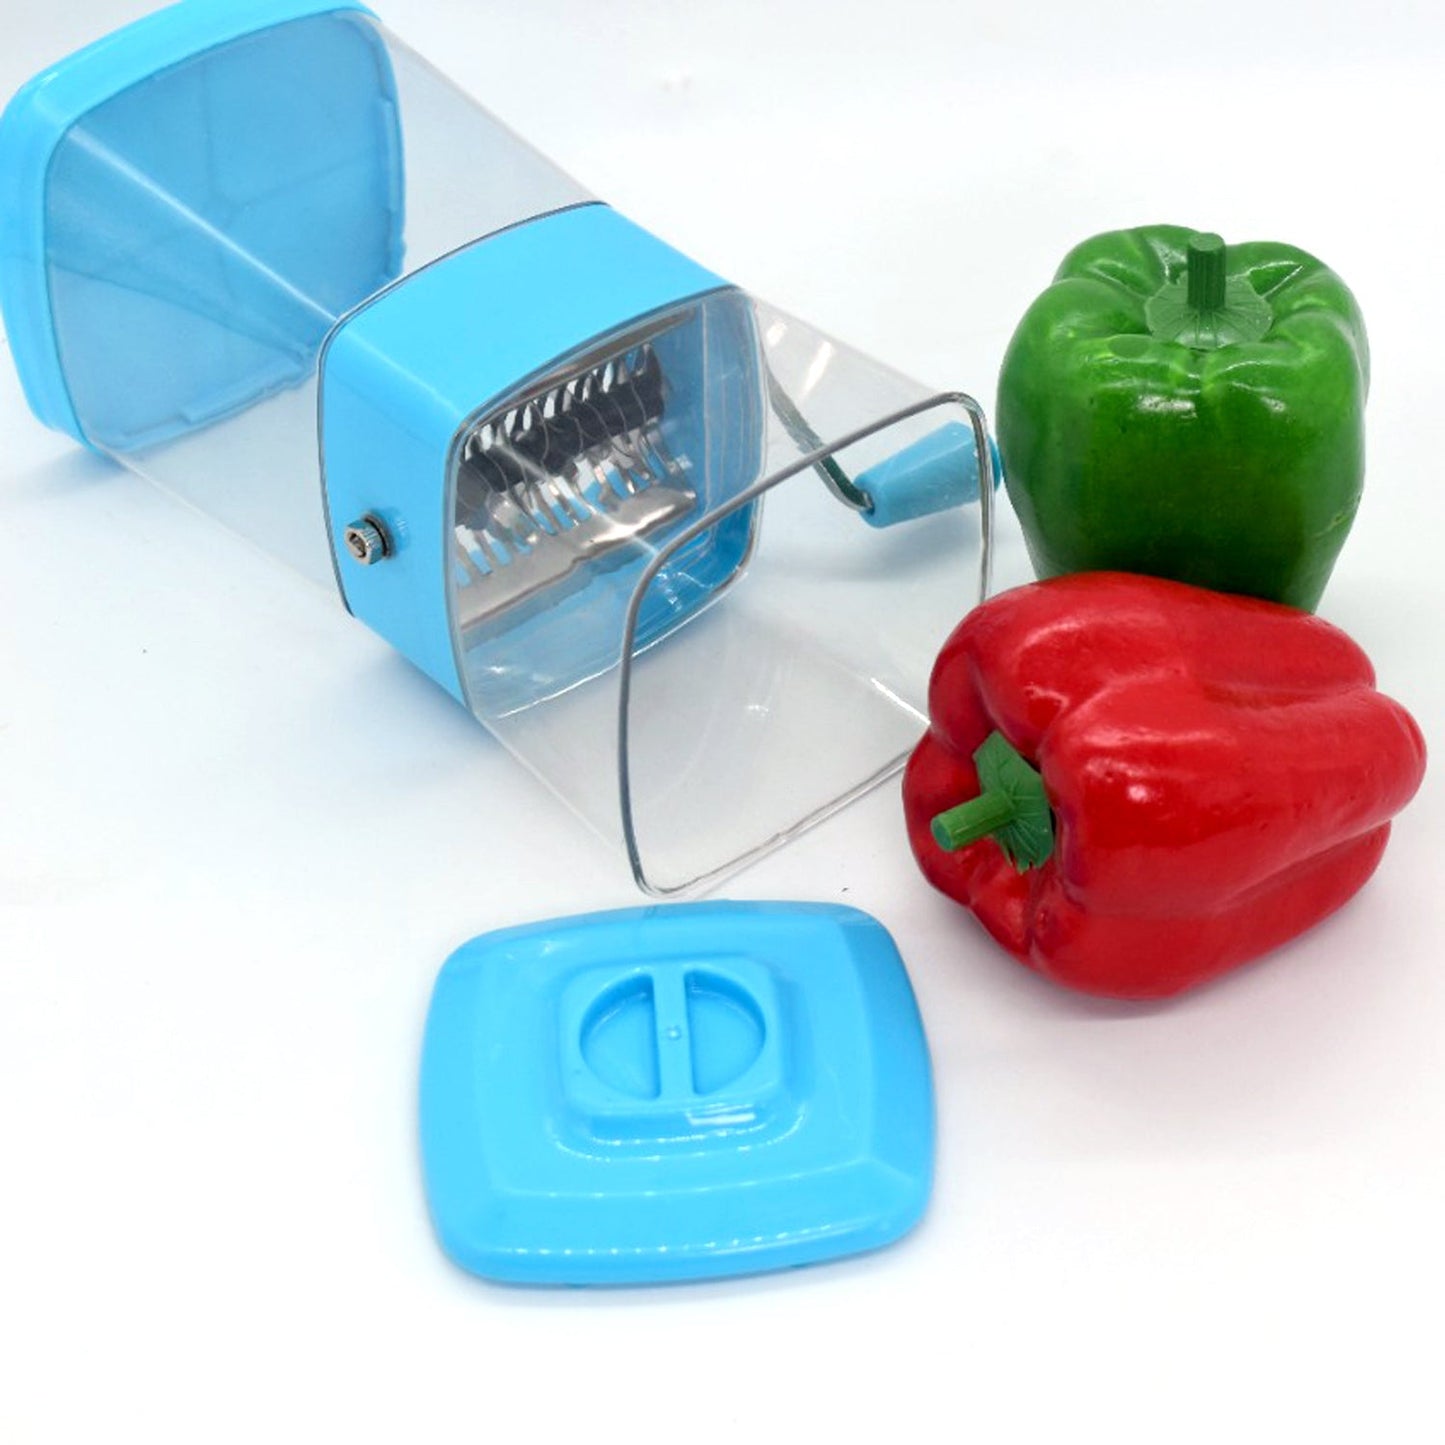 2798 Stainless Steel Vegetable Cutter Chopper (Chilly Cutter) Sharp Blades for Easy Cutting